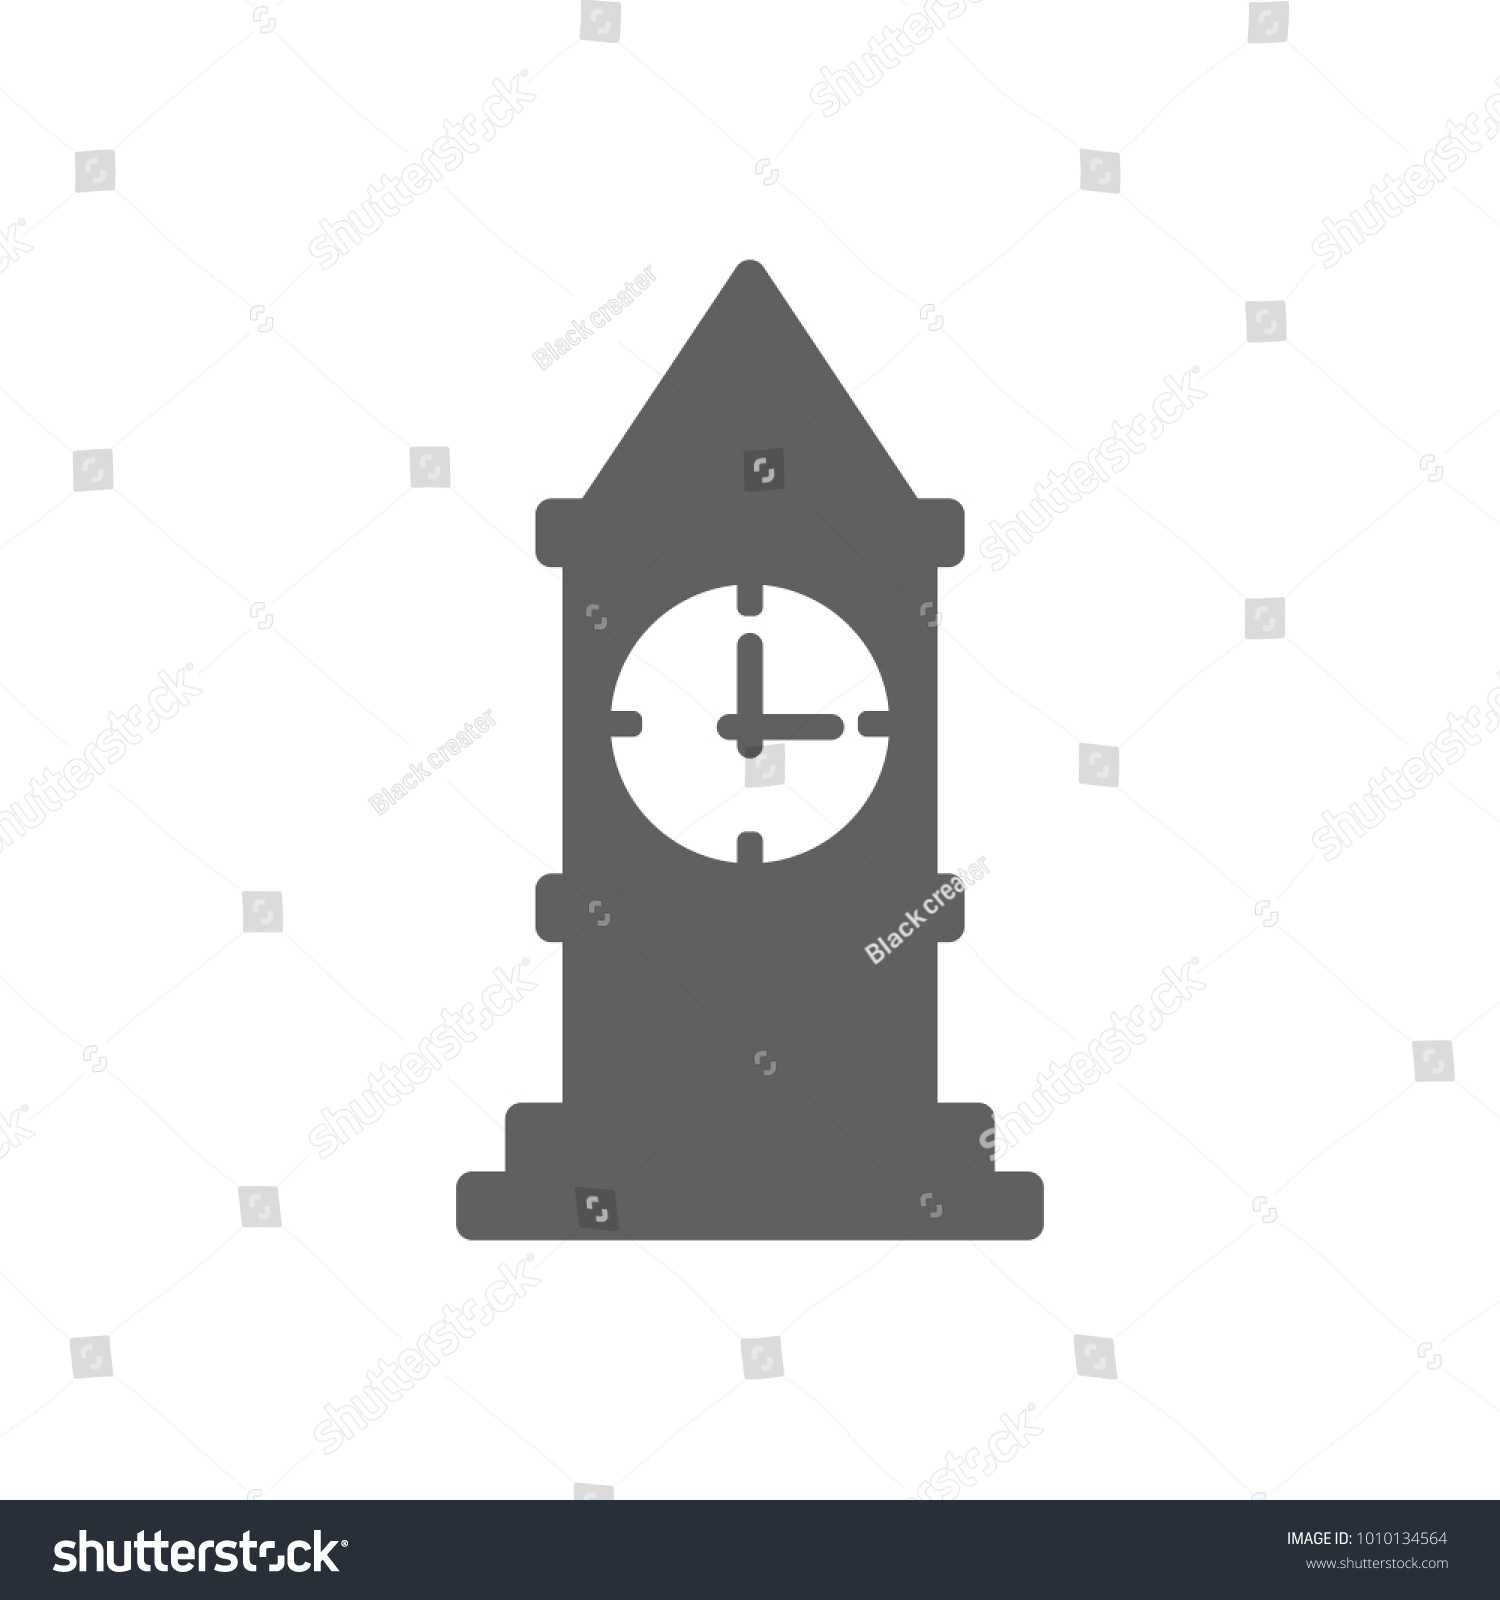 Clock tower icon Images, Stock Photos & Vectors | Shutterstock